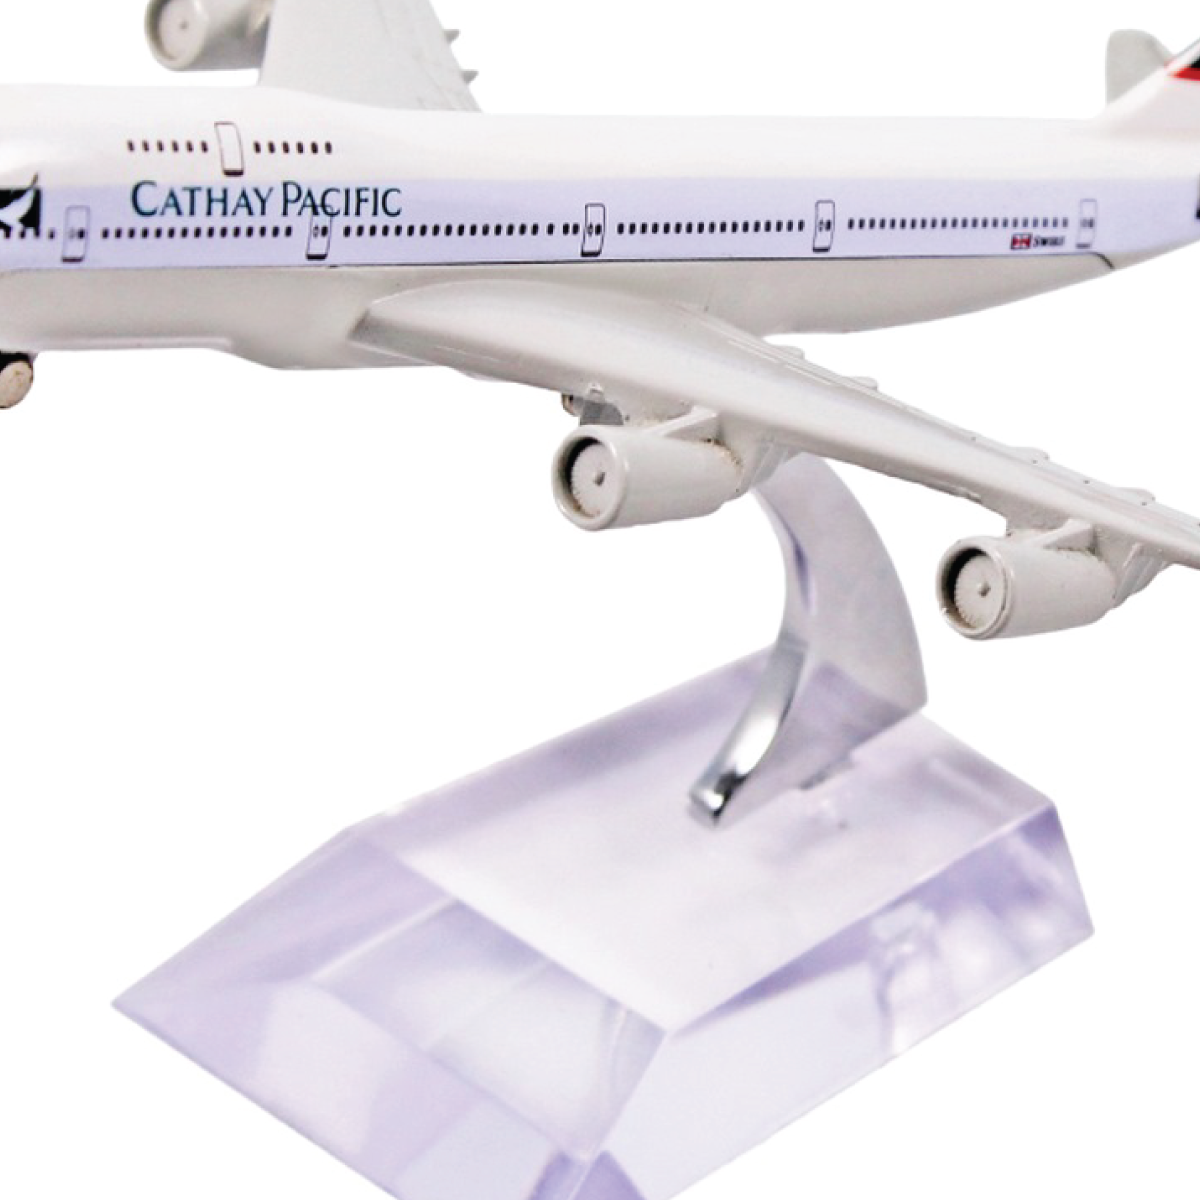 Aircraft Model Small Cathay Pacific - For Office Use, Personal Use, or Corporate Gifting